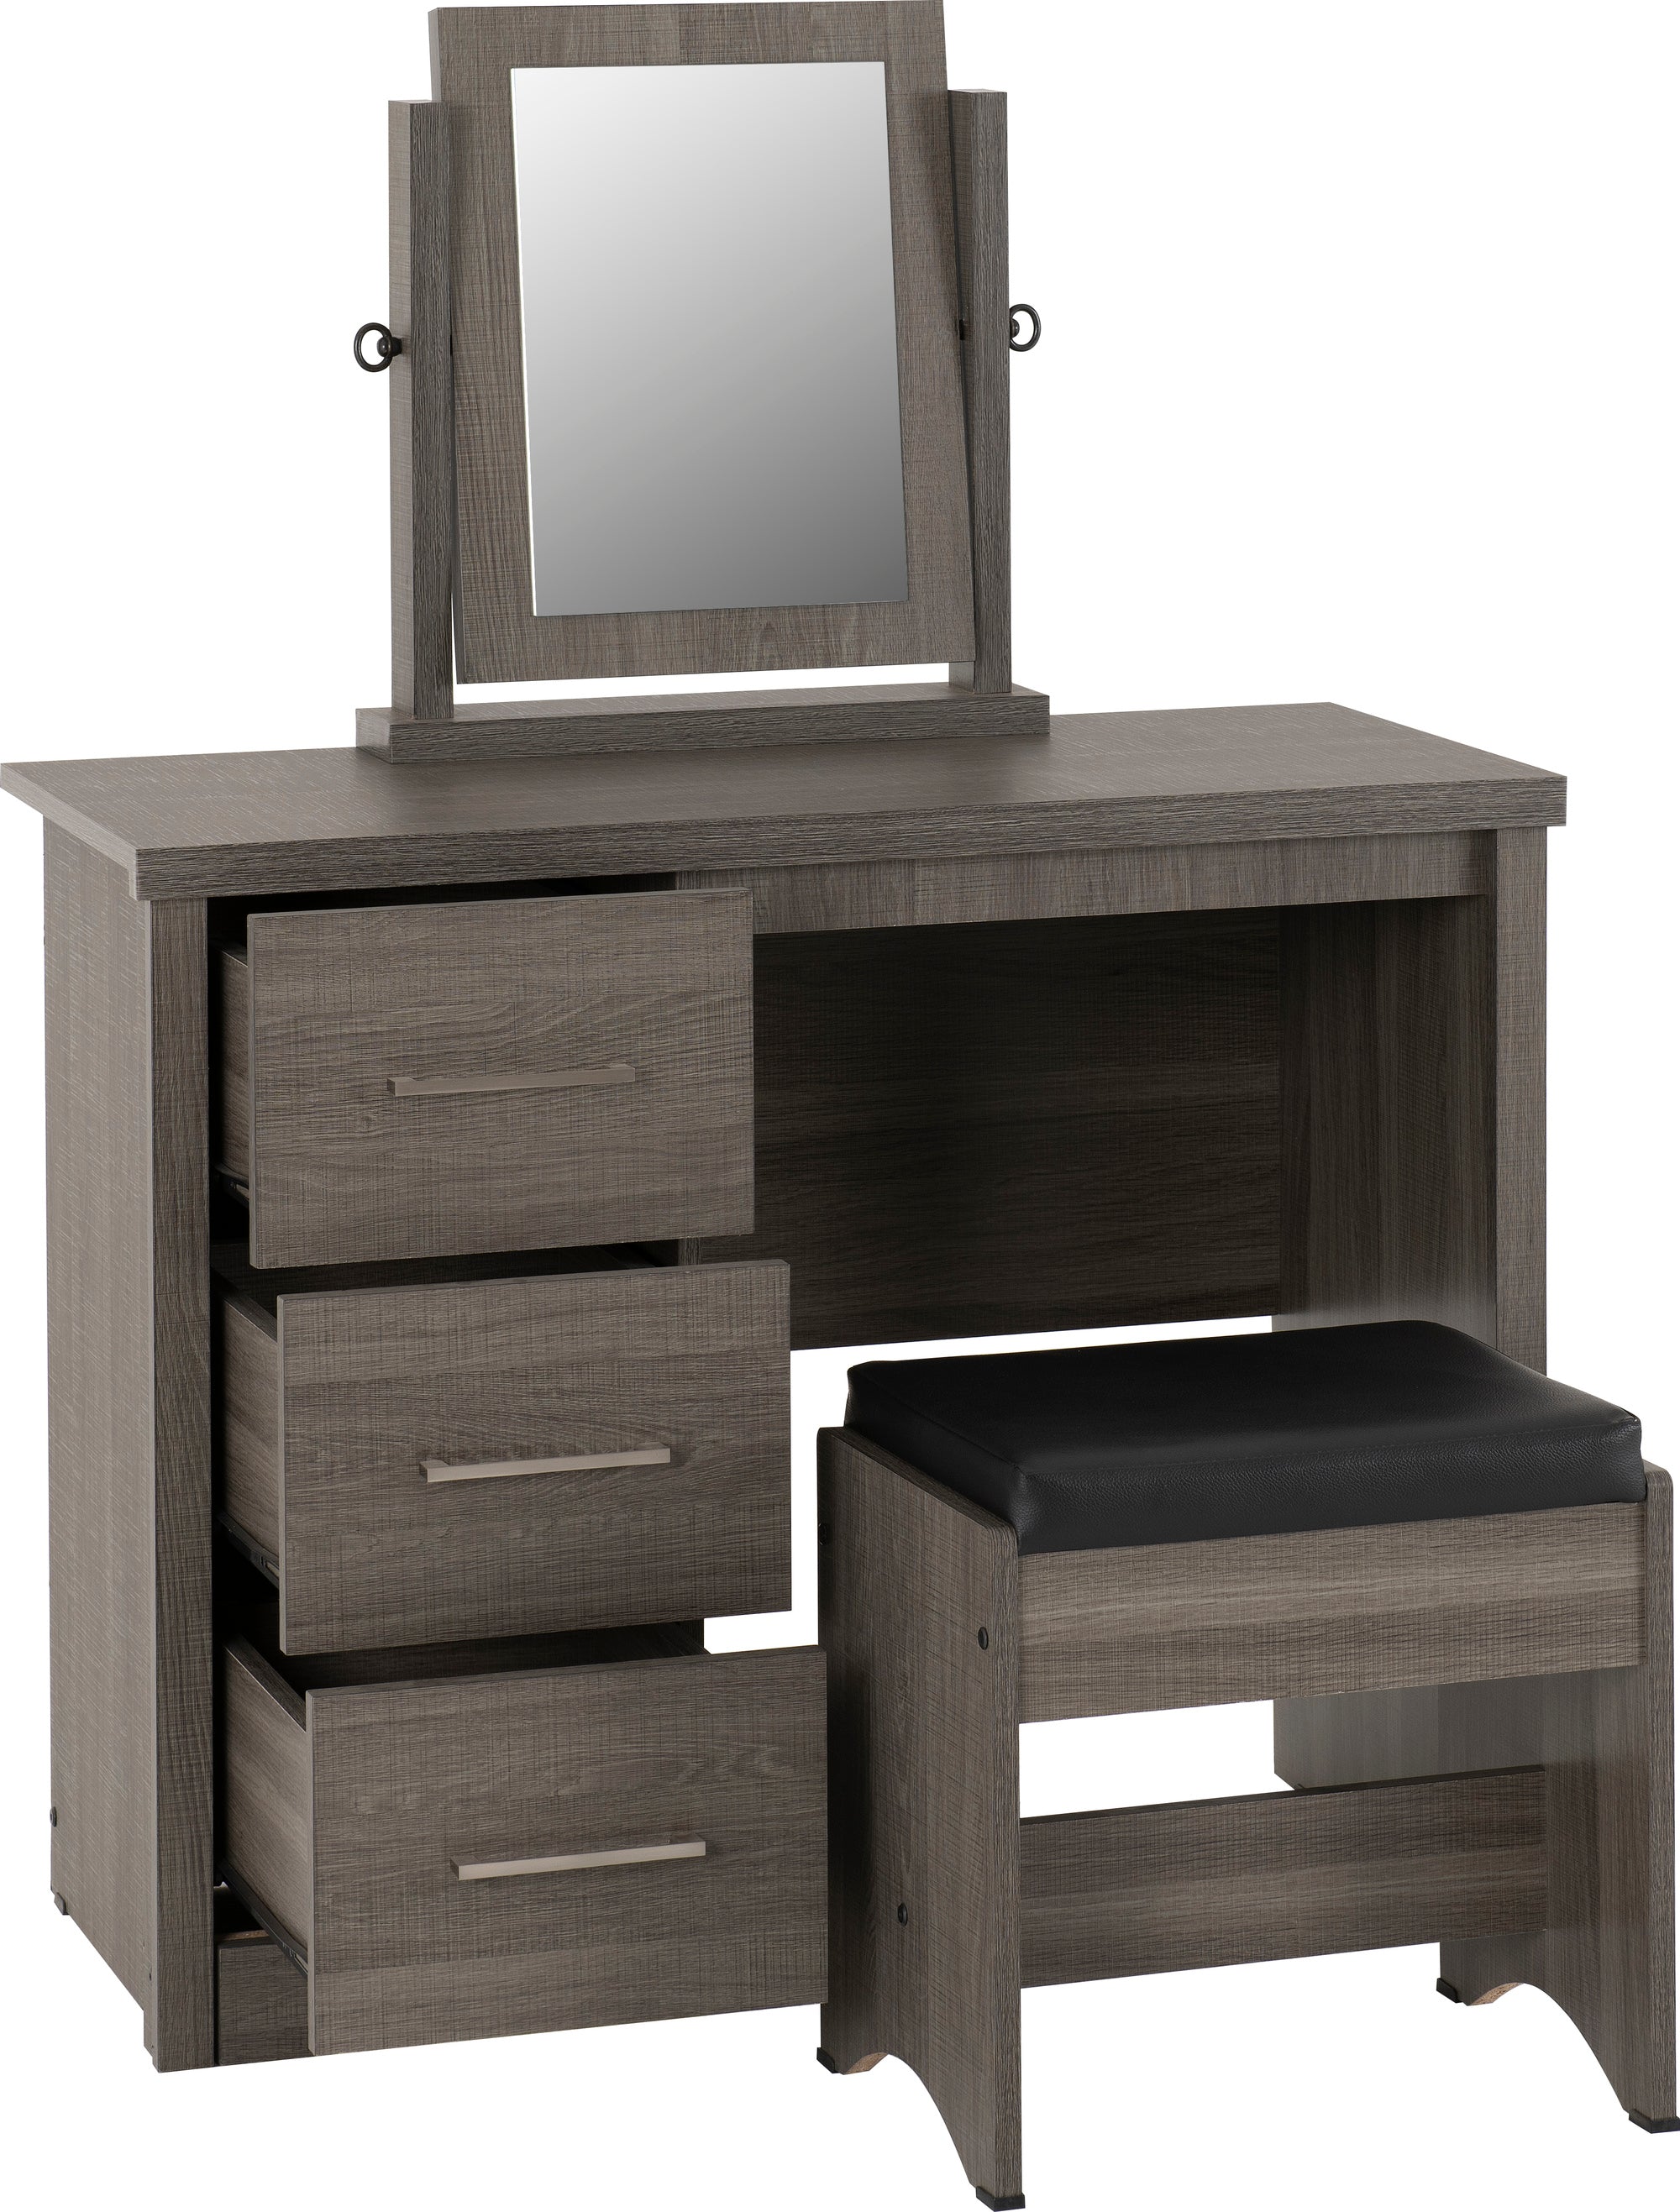 Lisbon 3 Piece Dressing Table Set with Mirror